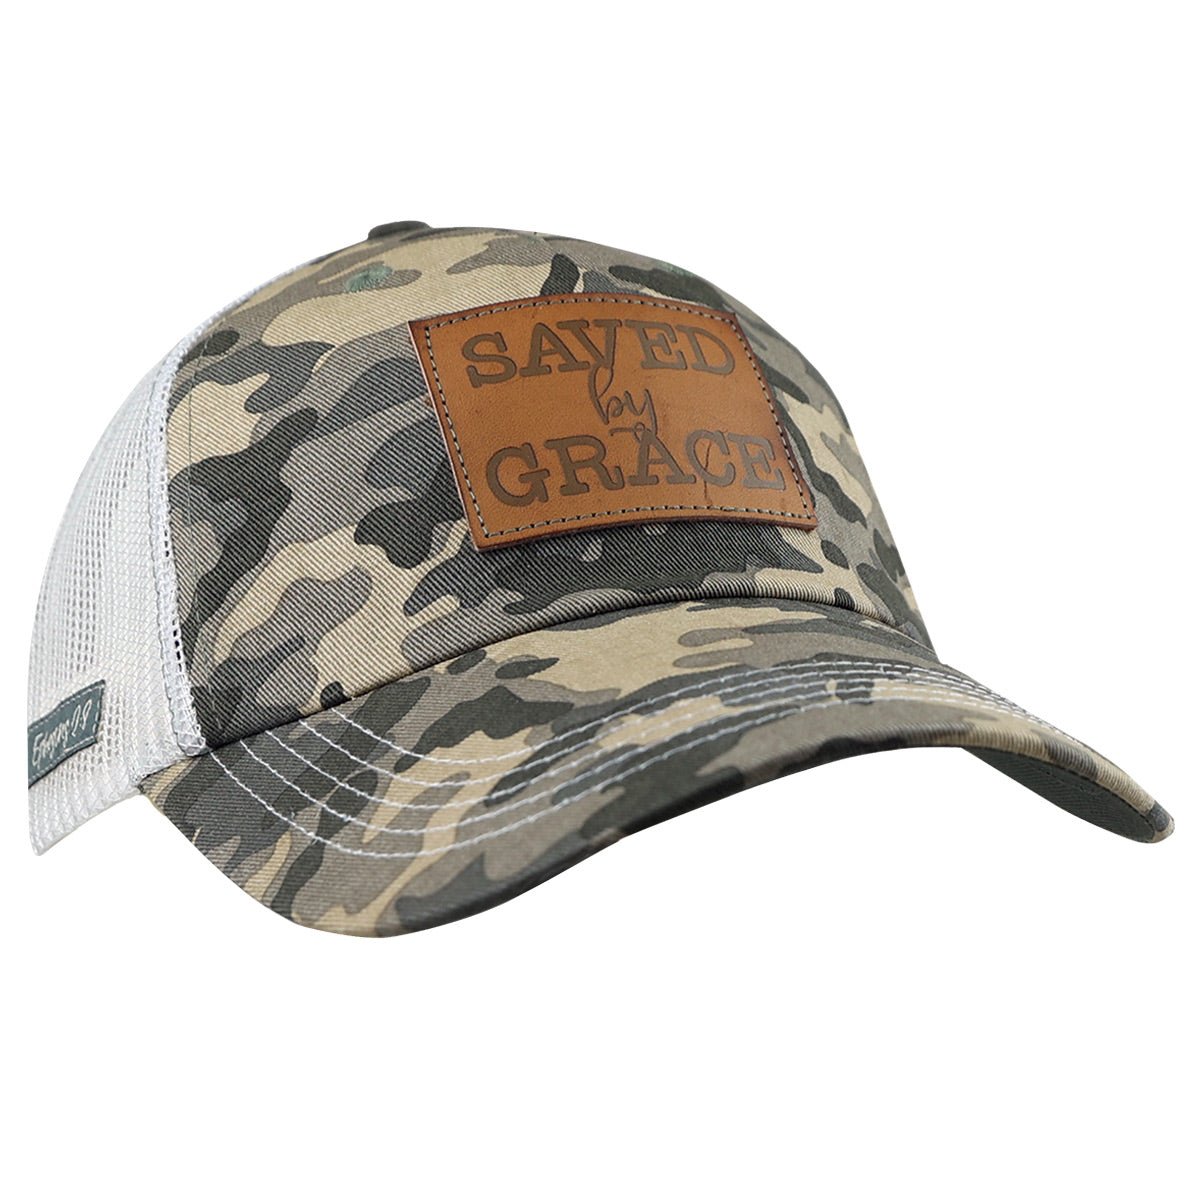 grace & truth Womens Cap Saved By Grace | 2FruitBearers